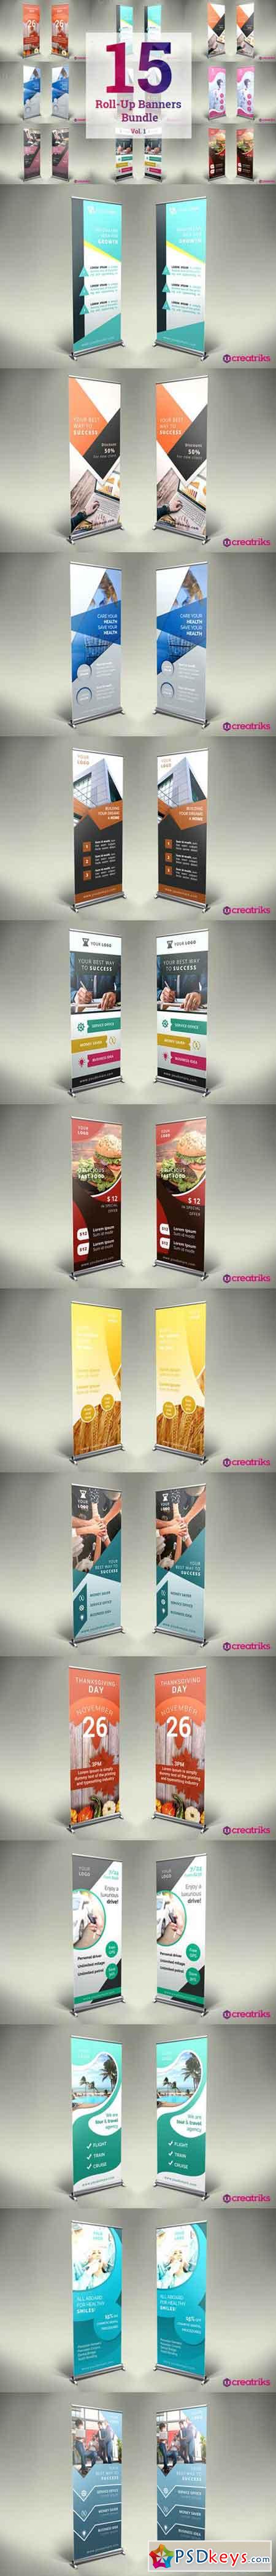 15 Roll-Up Banners Bundle vol.1 952736